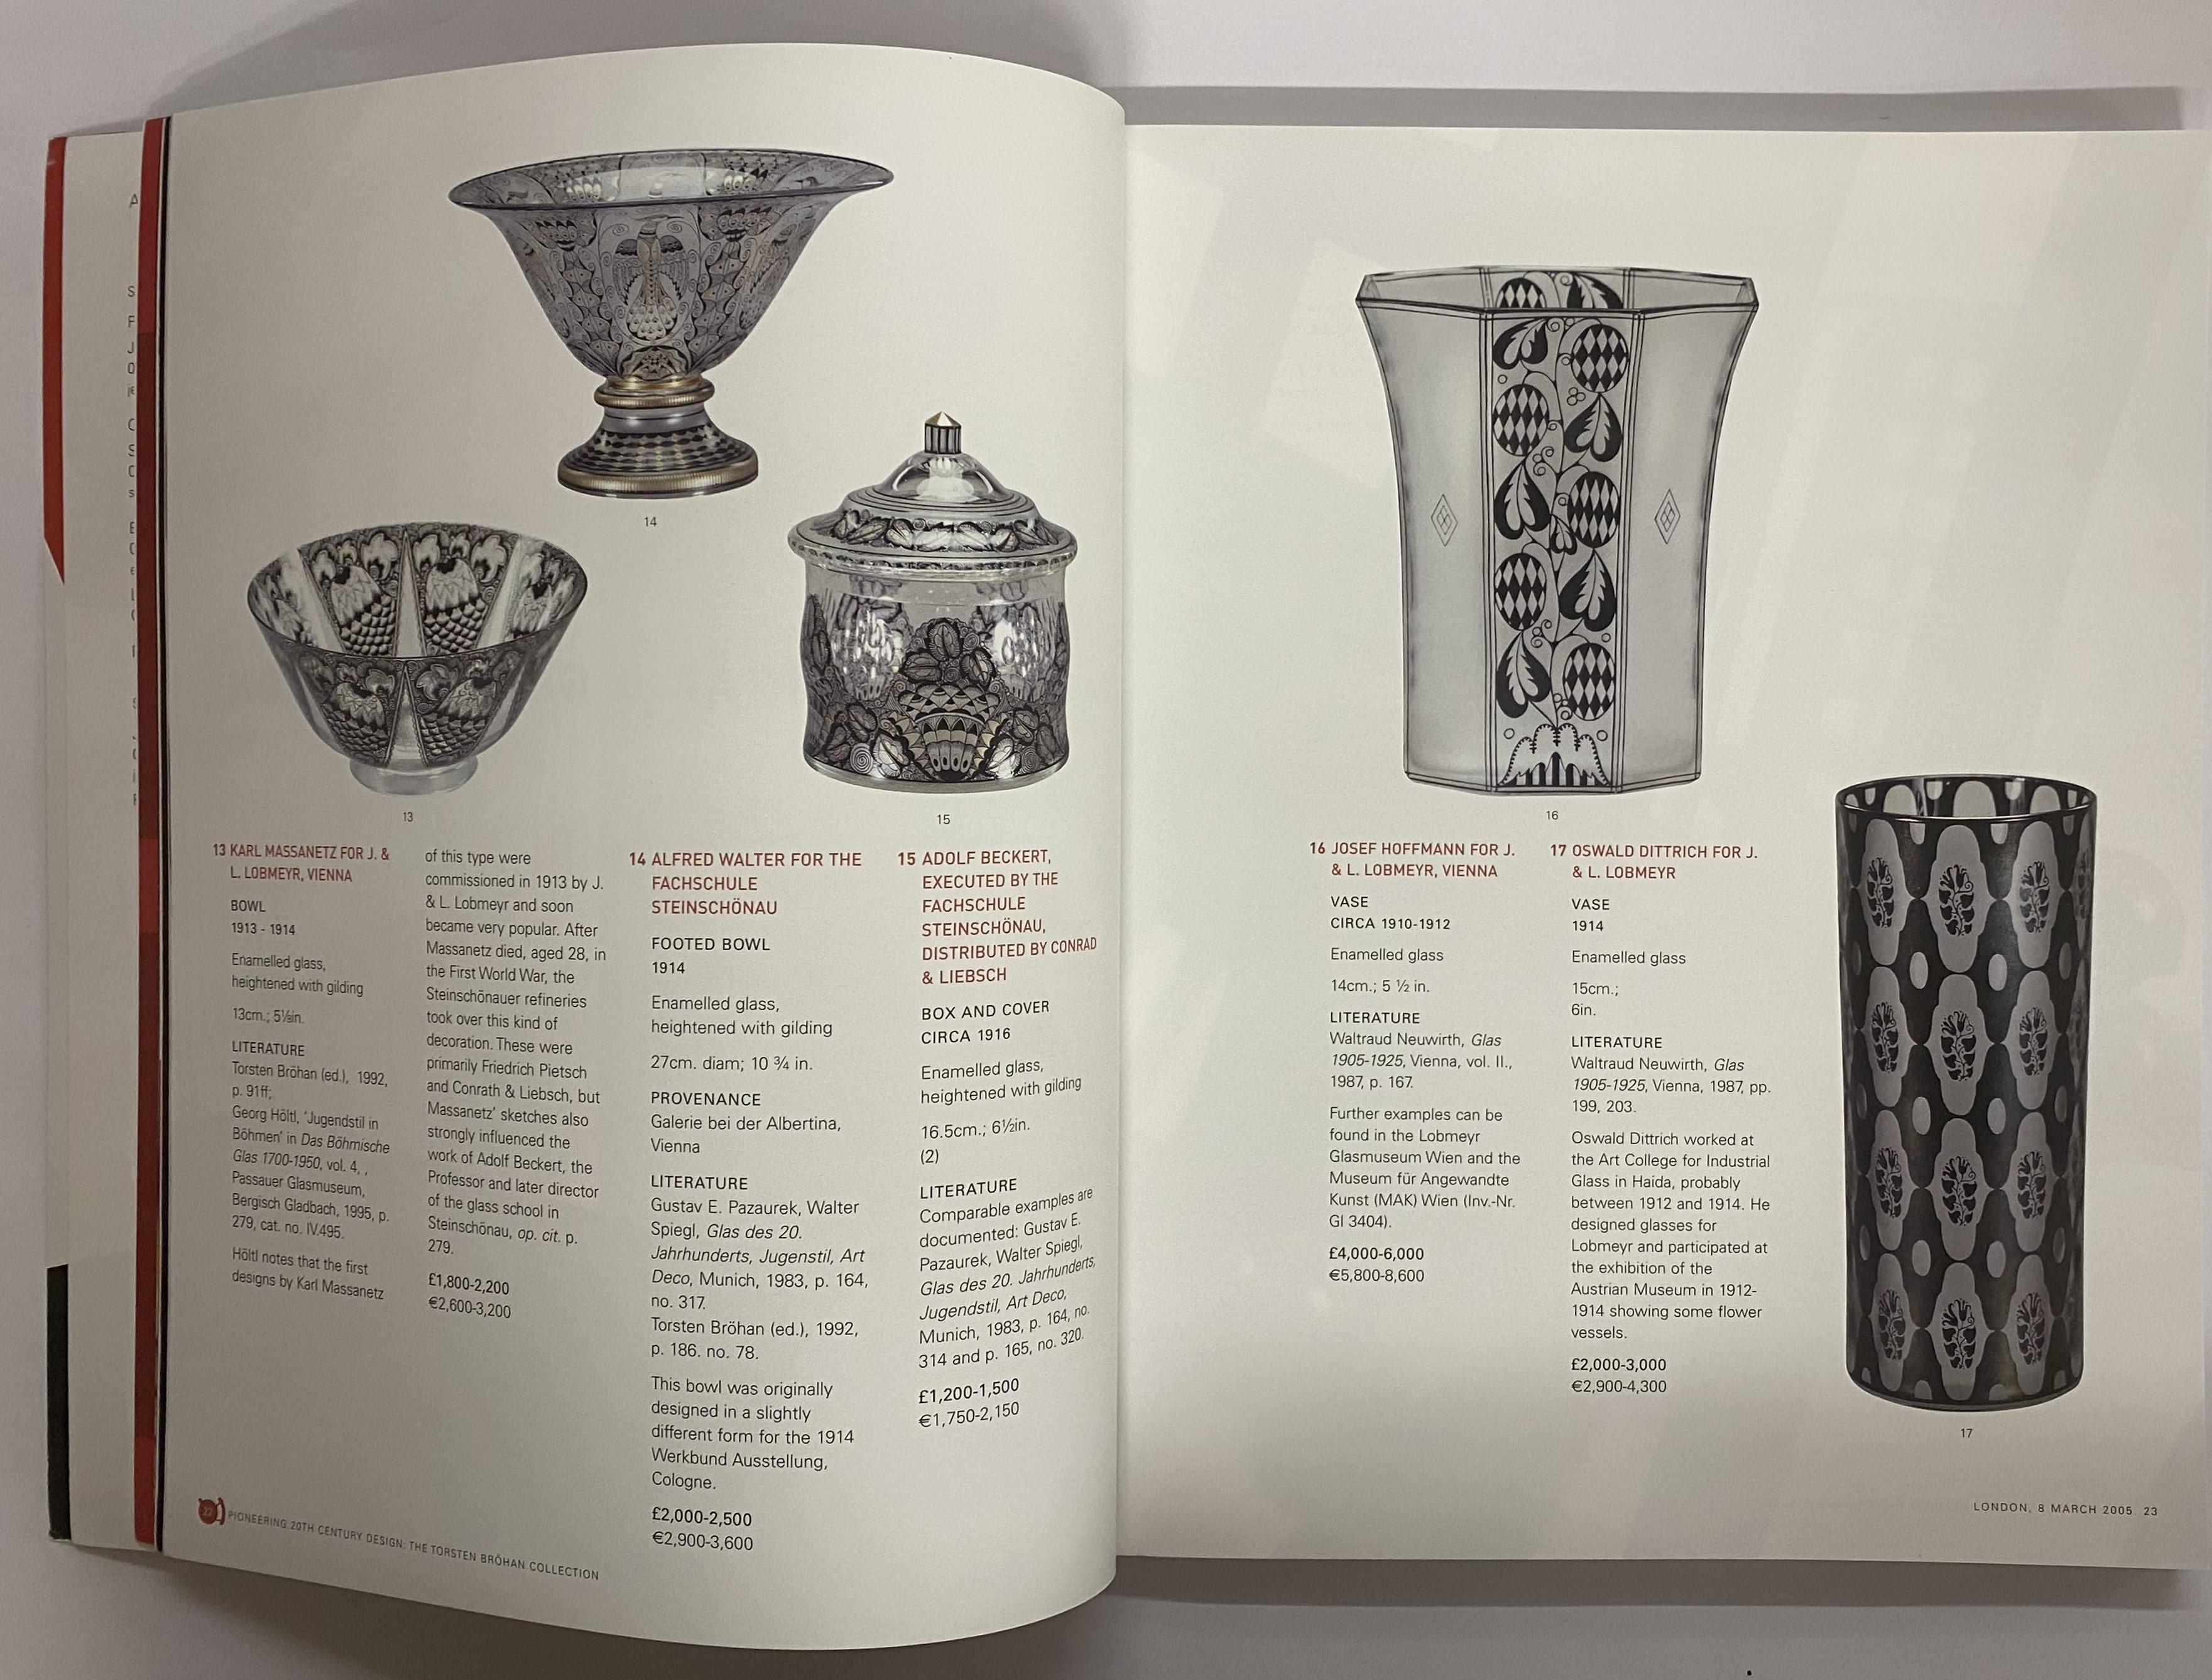 Sotheby's sale 8th March 2005 London.
This covers Art Nouveau, Art Deco and Modernist lots. There are many photographs of the items throughout the catalogue., with 257 lots.
When the British founded the Arts and Crafts movement in the 1860's, one of